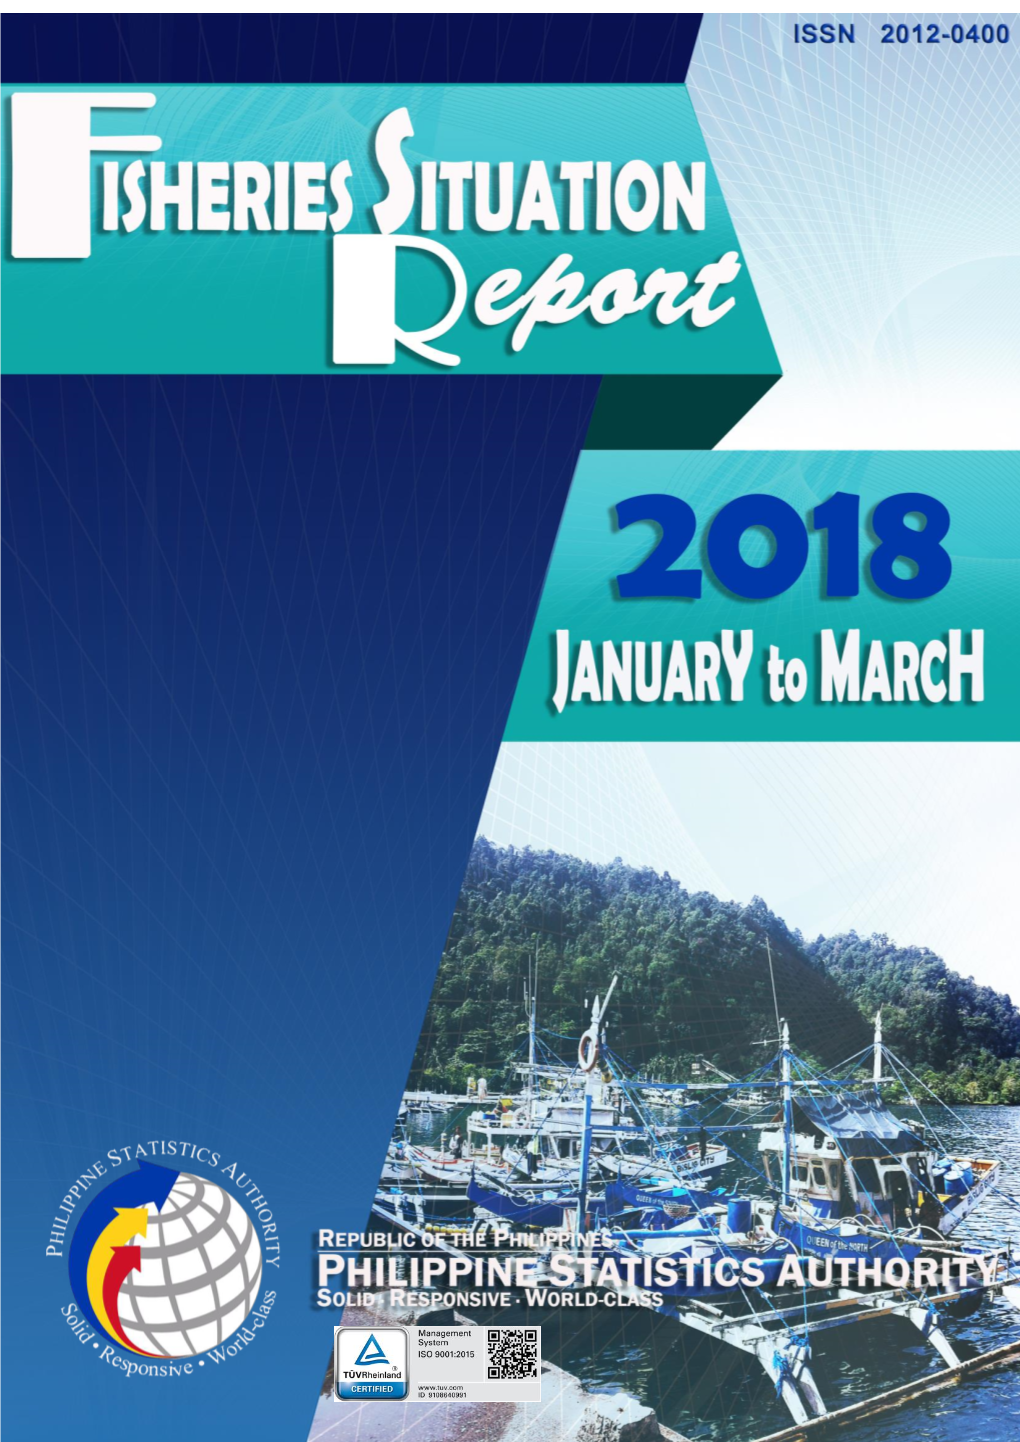 Fisheries Situation Report, January to March 2018